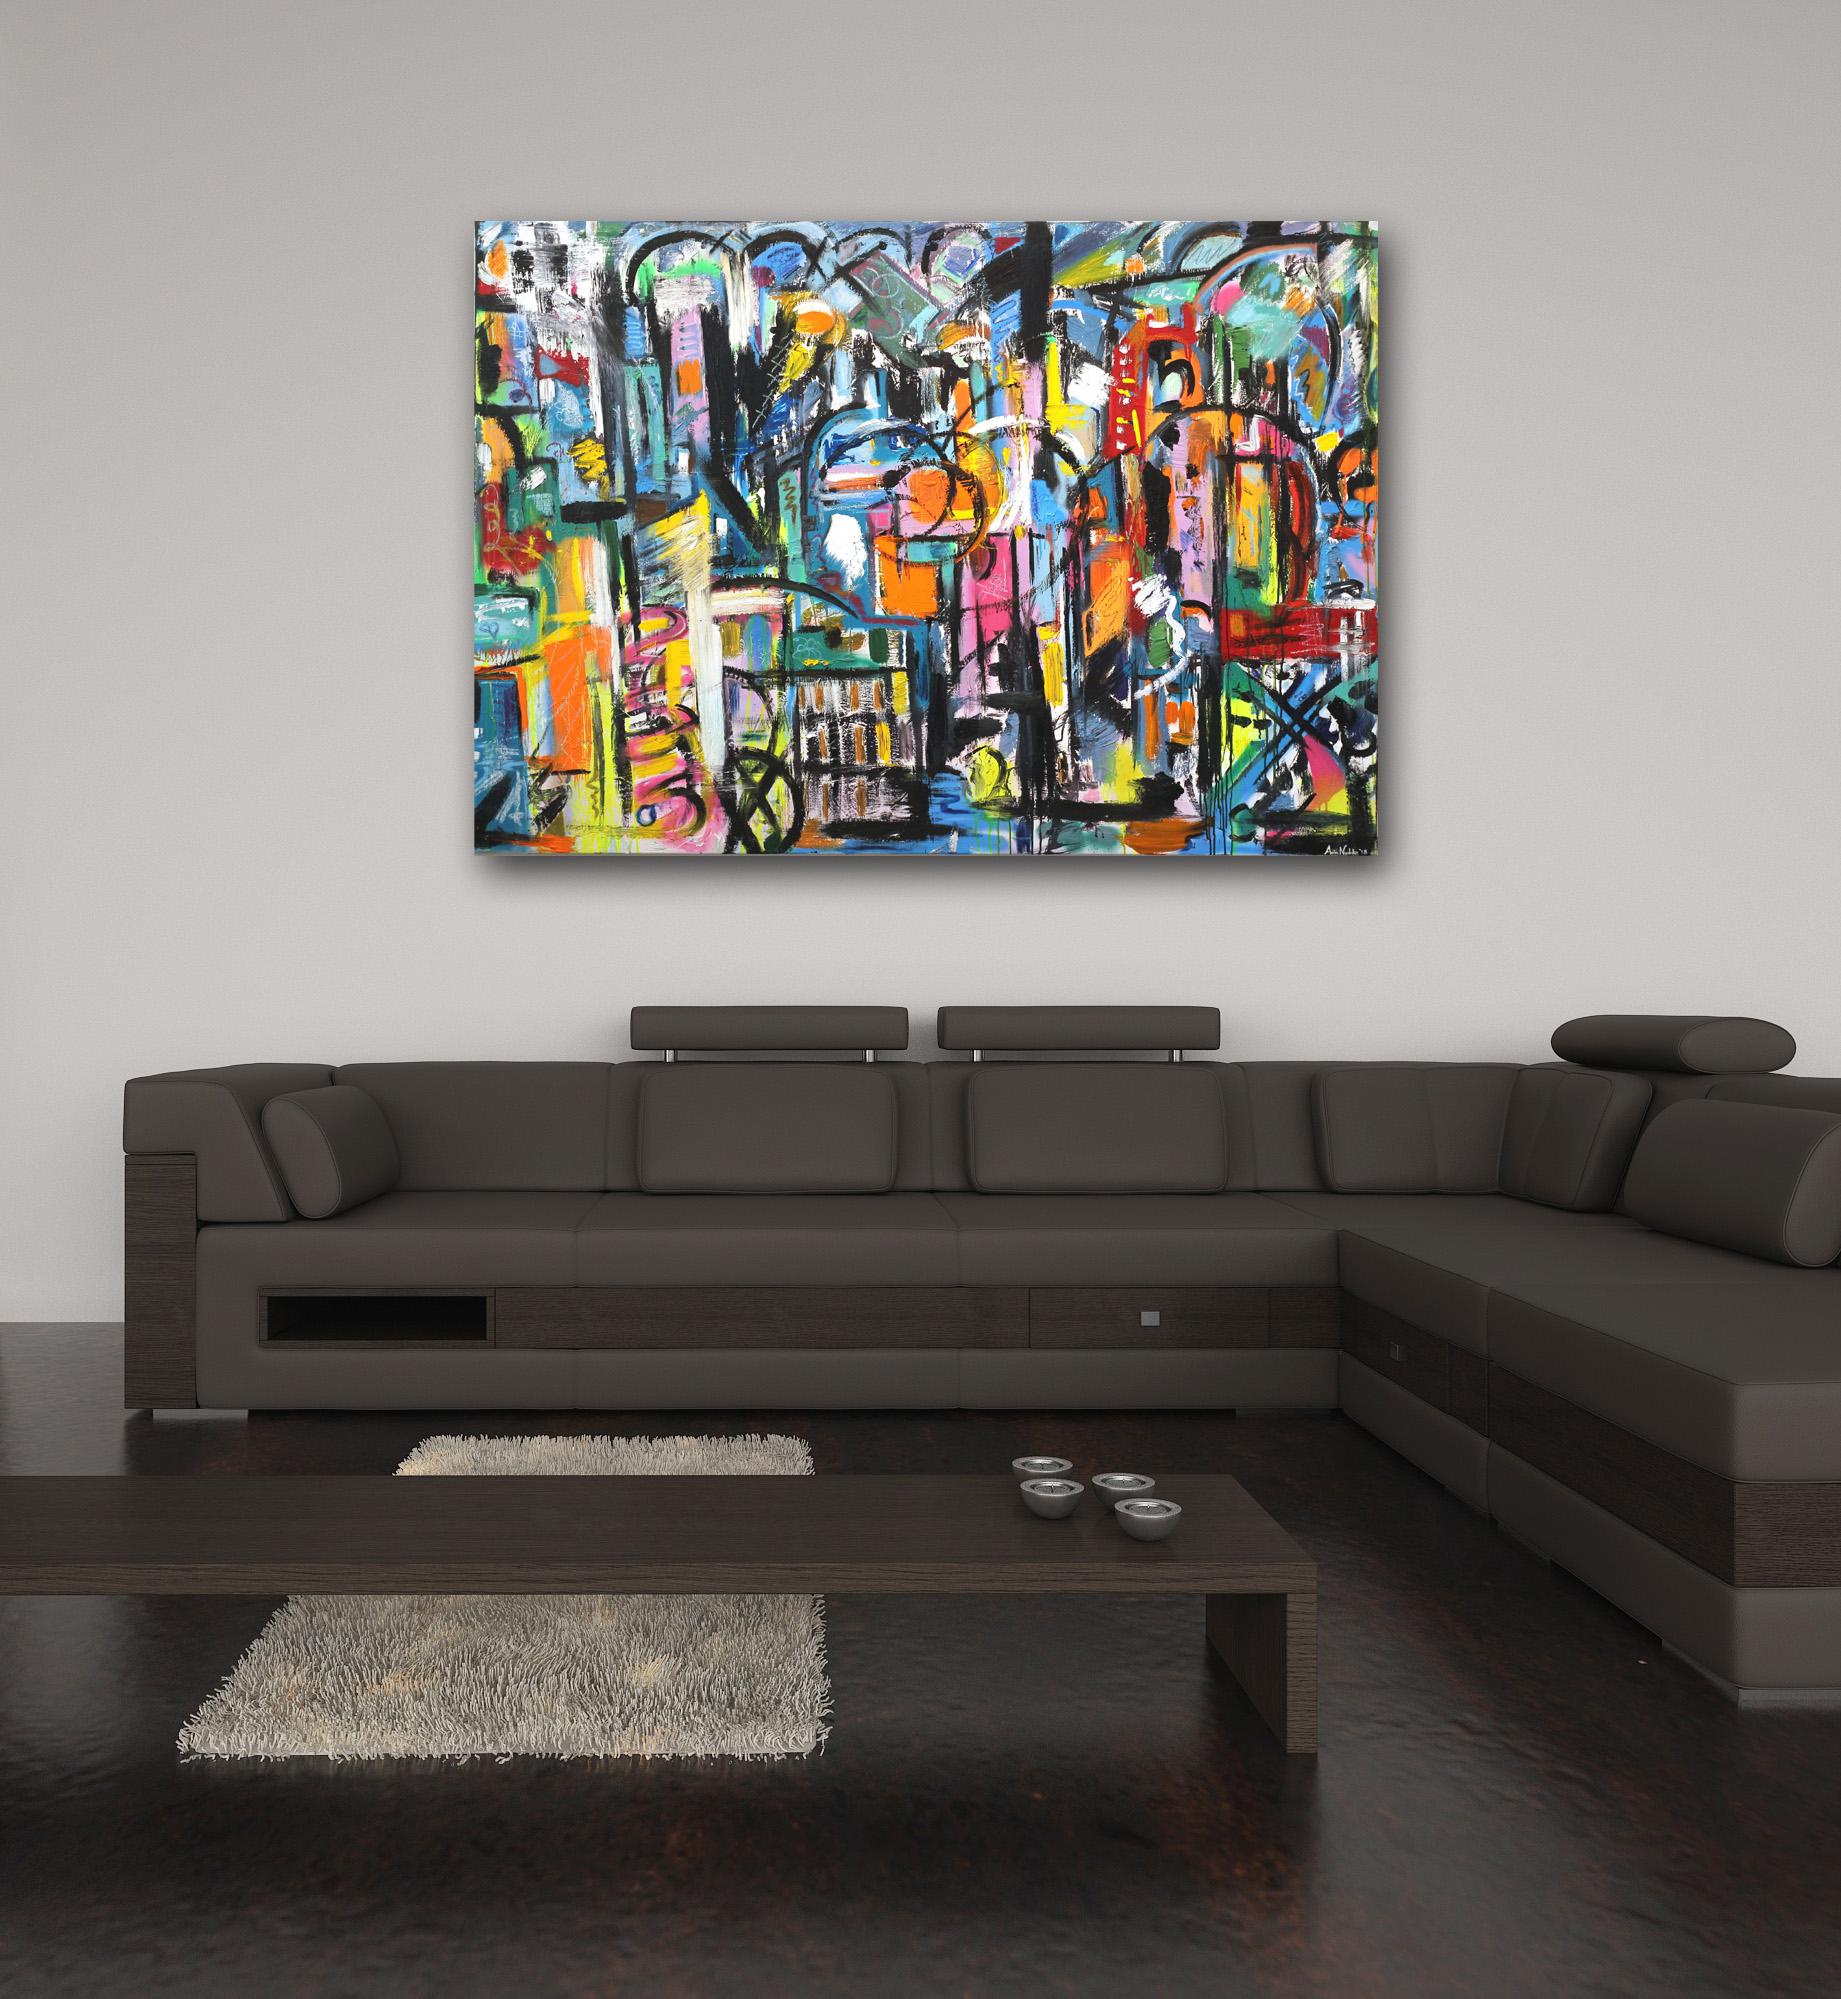 Broken City Series 2 - Abstract Expressionist Mixed Media Art by Austin Reed